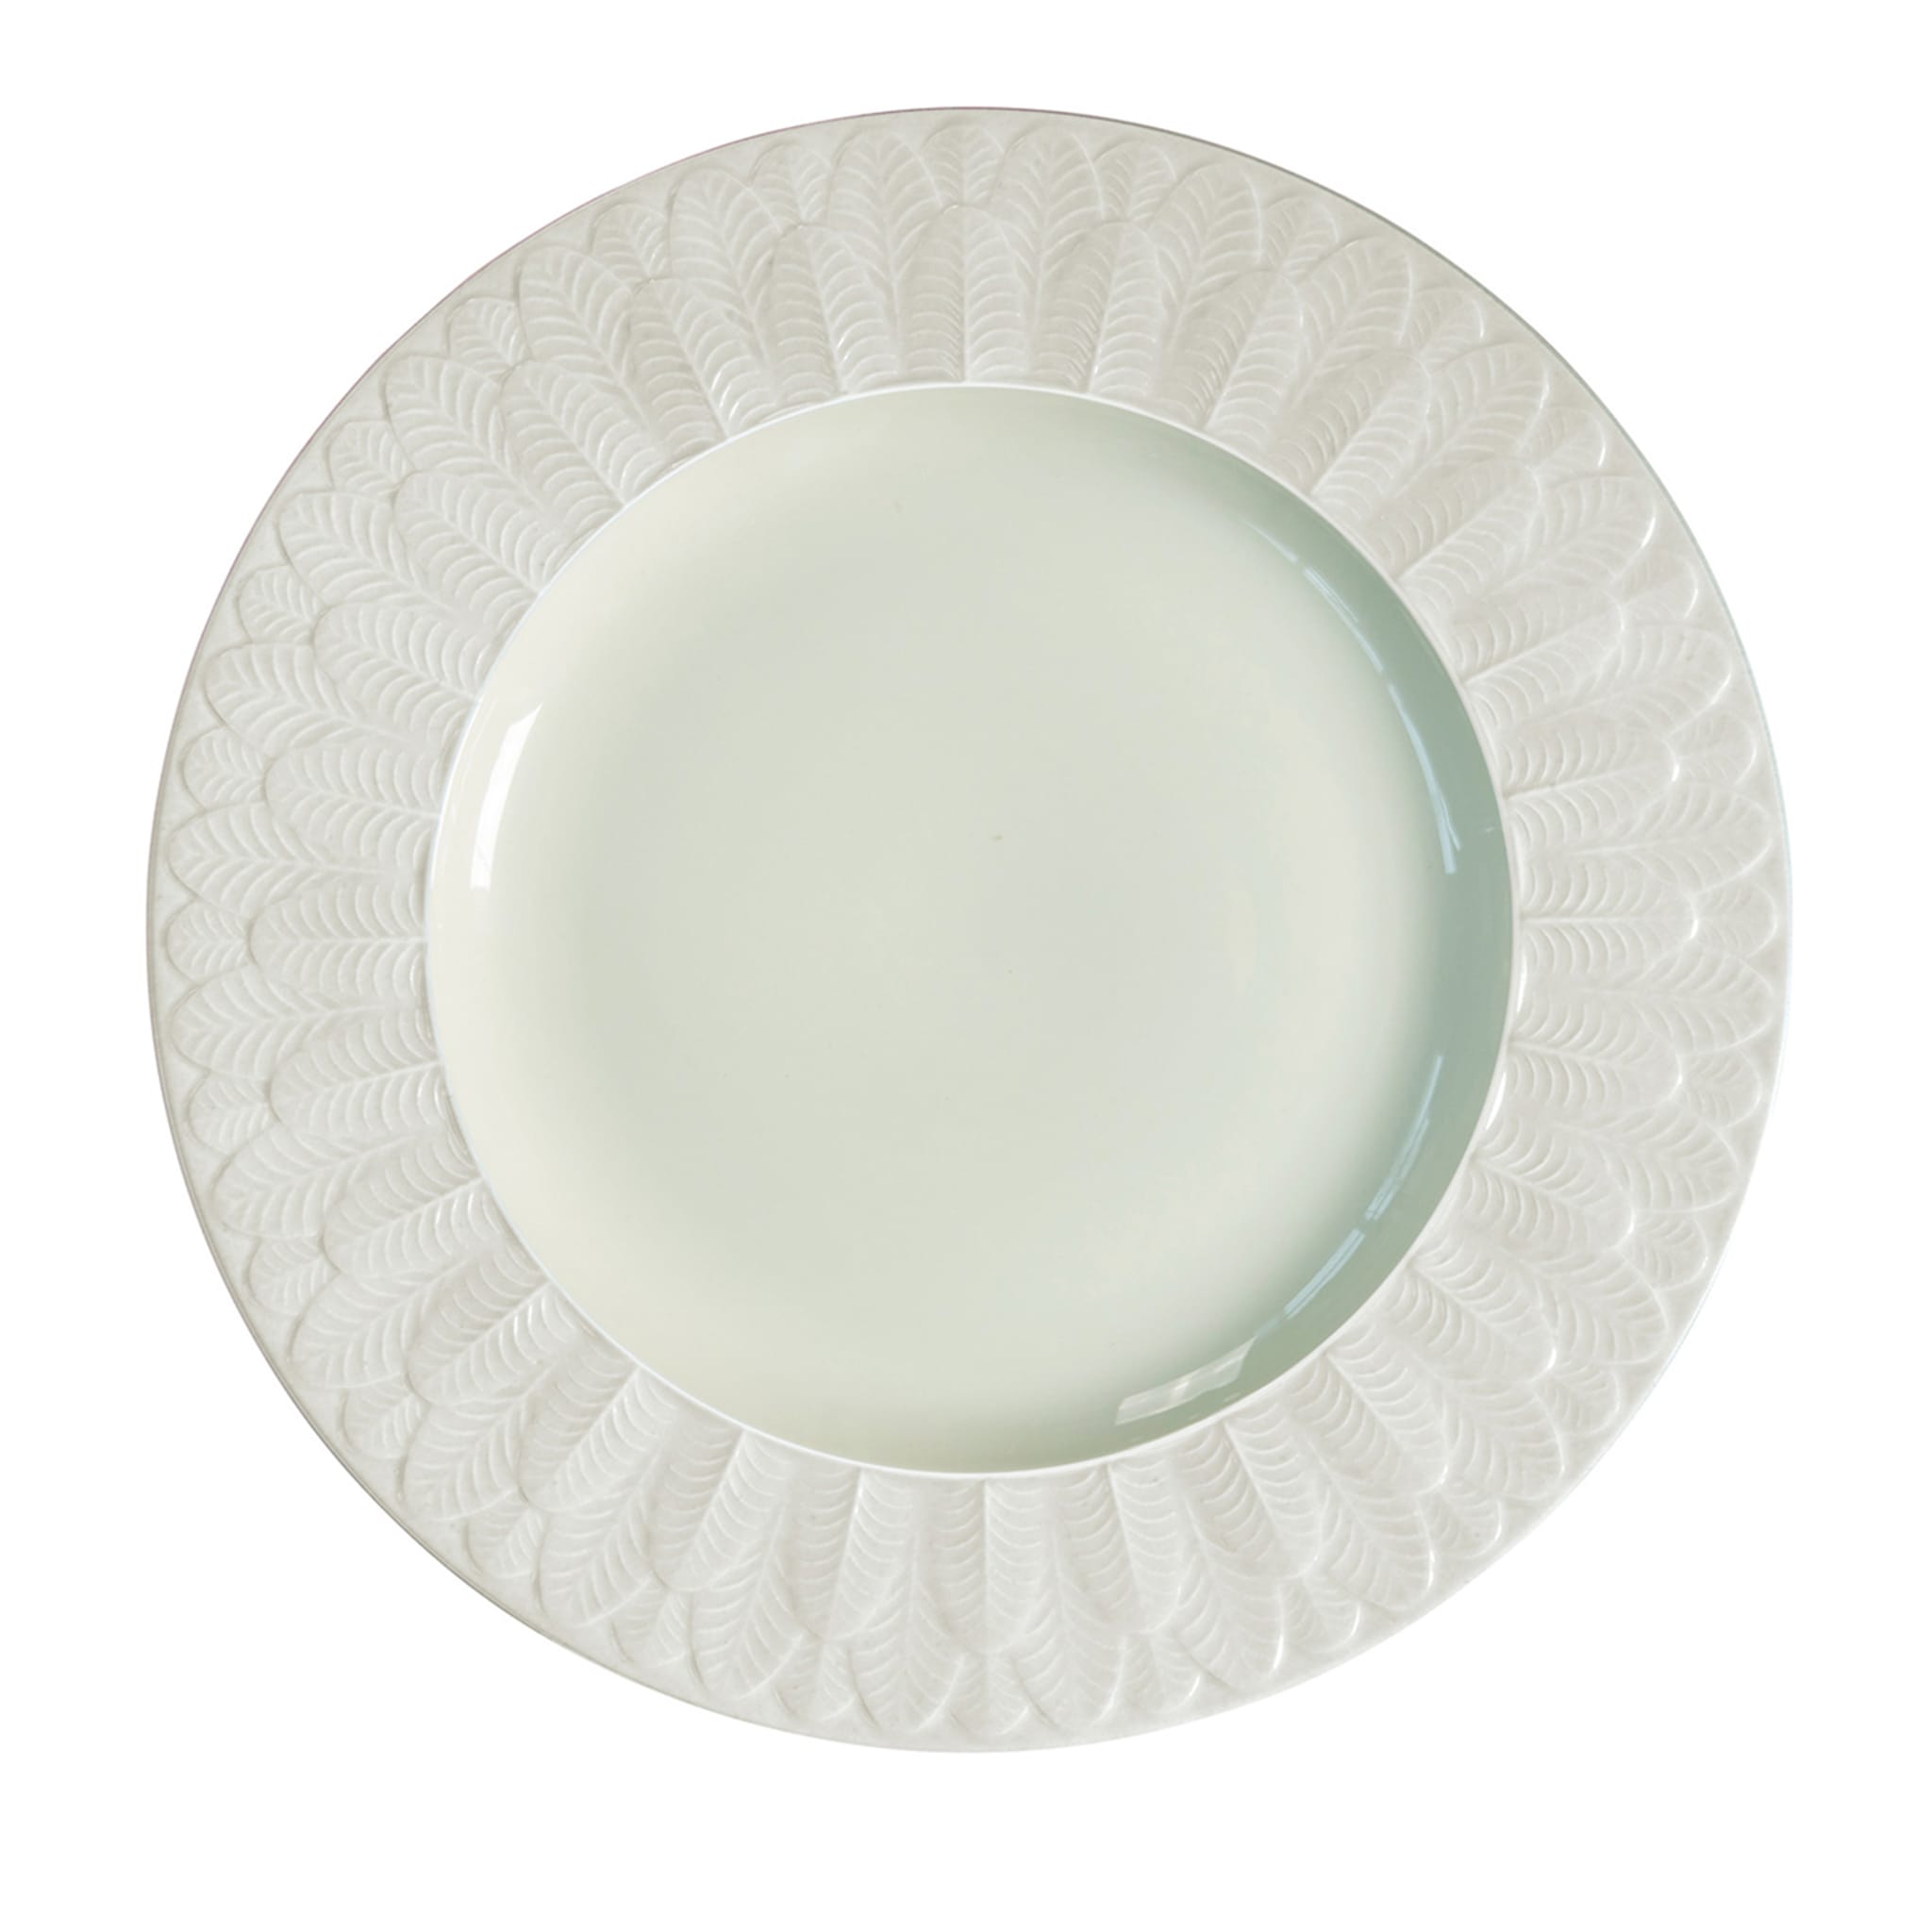 PEACOCK LAY PLATE - WHITE  - Main view